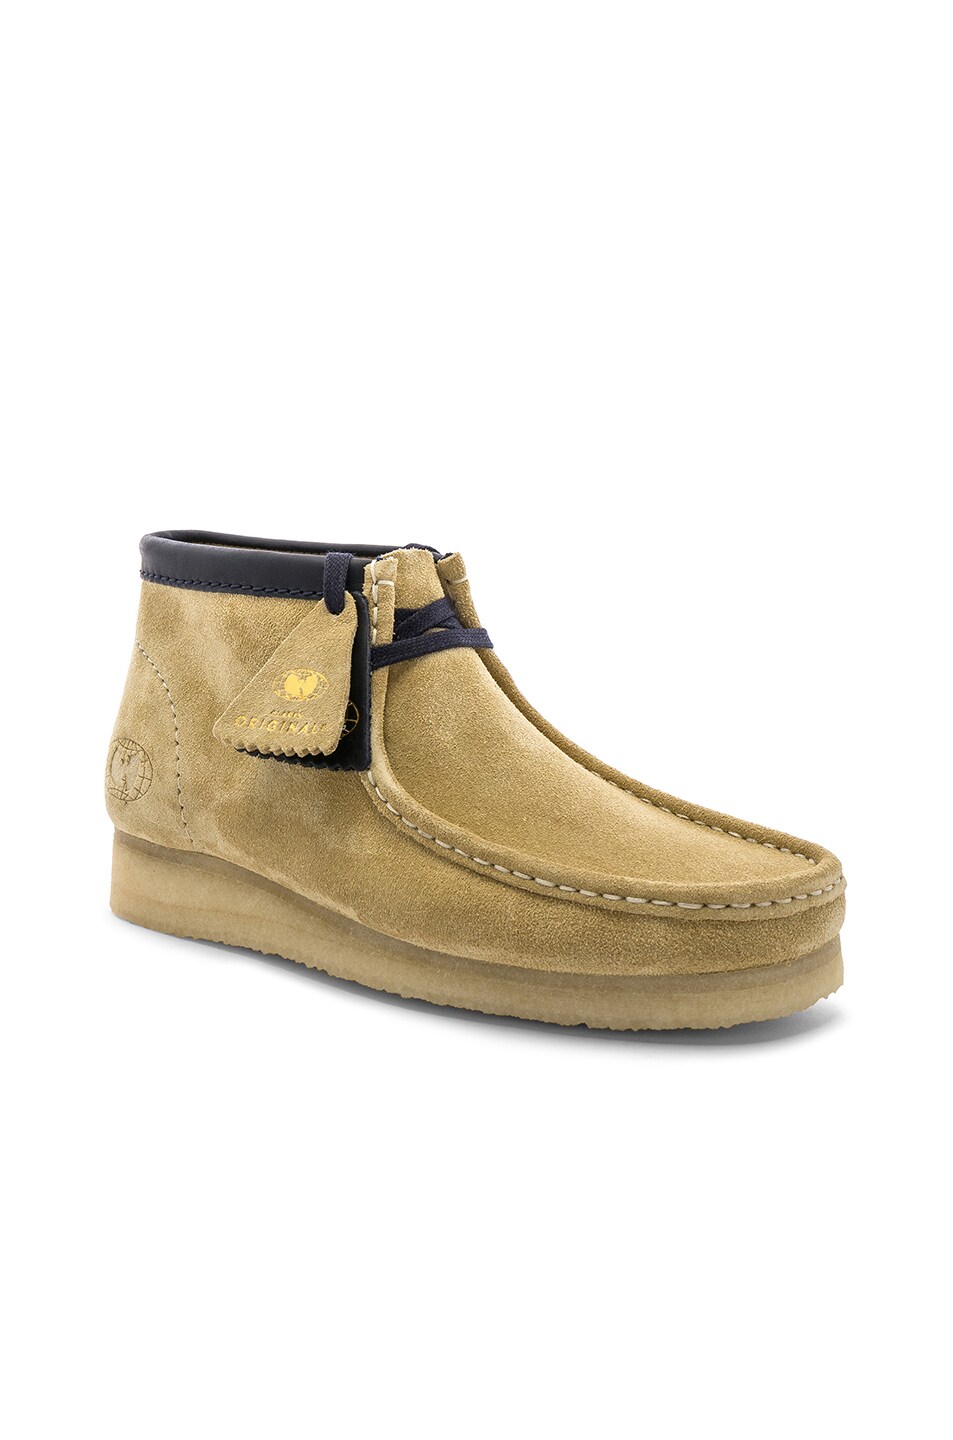 Image 1 of Clarks x Wu Tang 36th Chamber in Maple & Ink